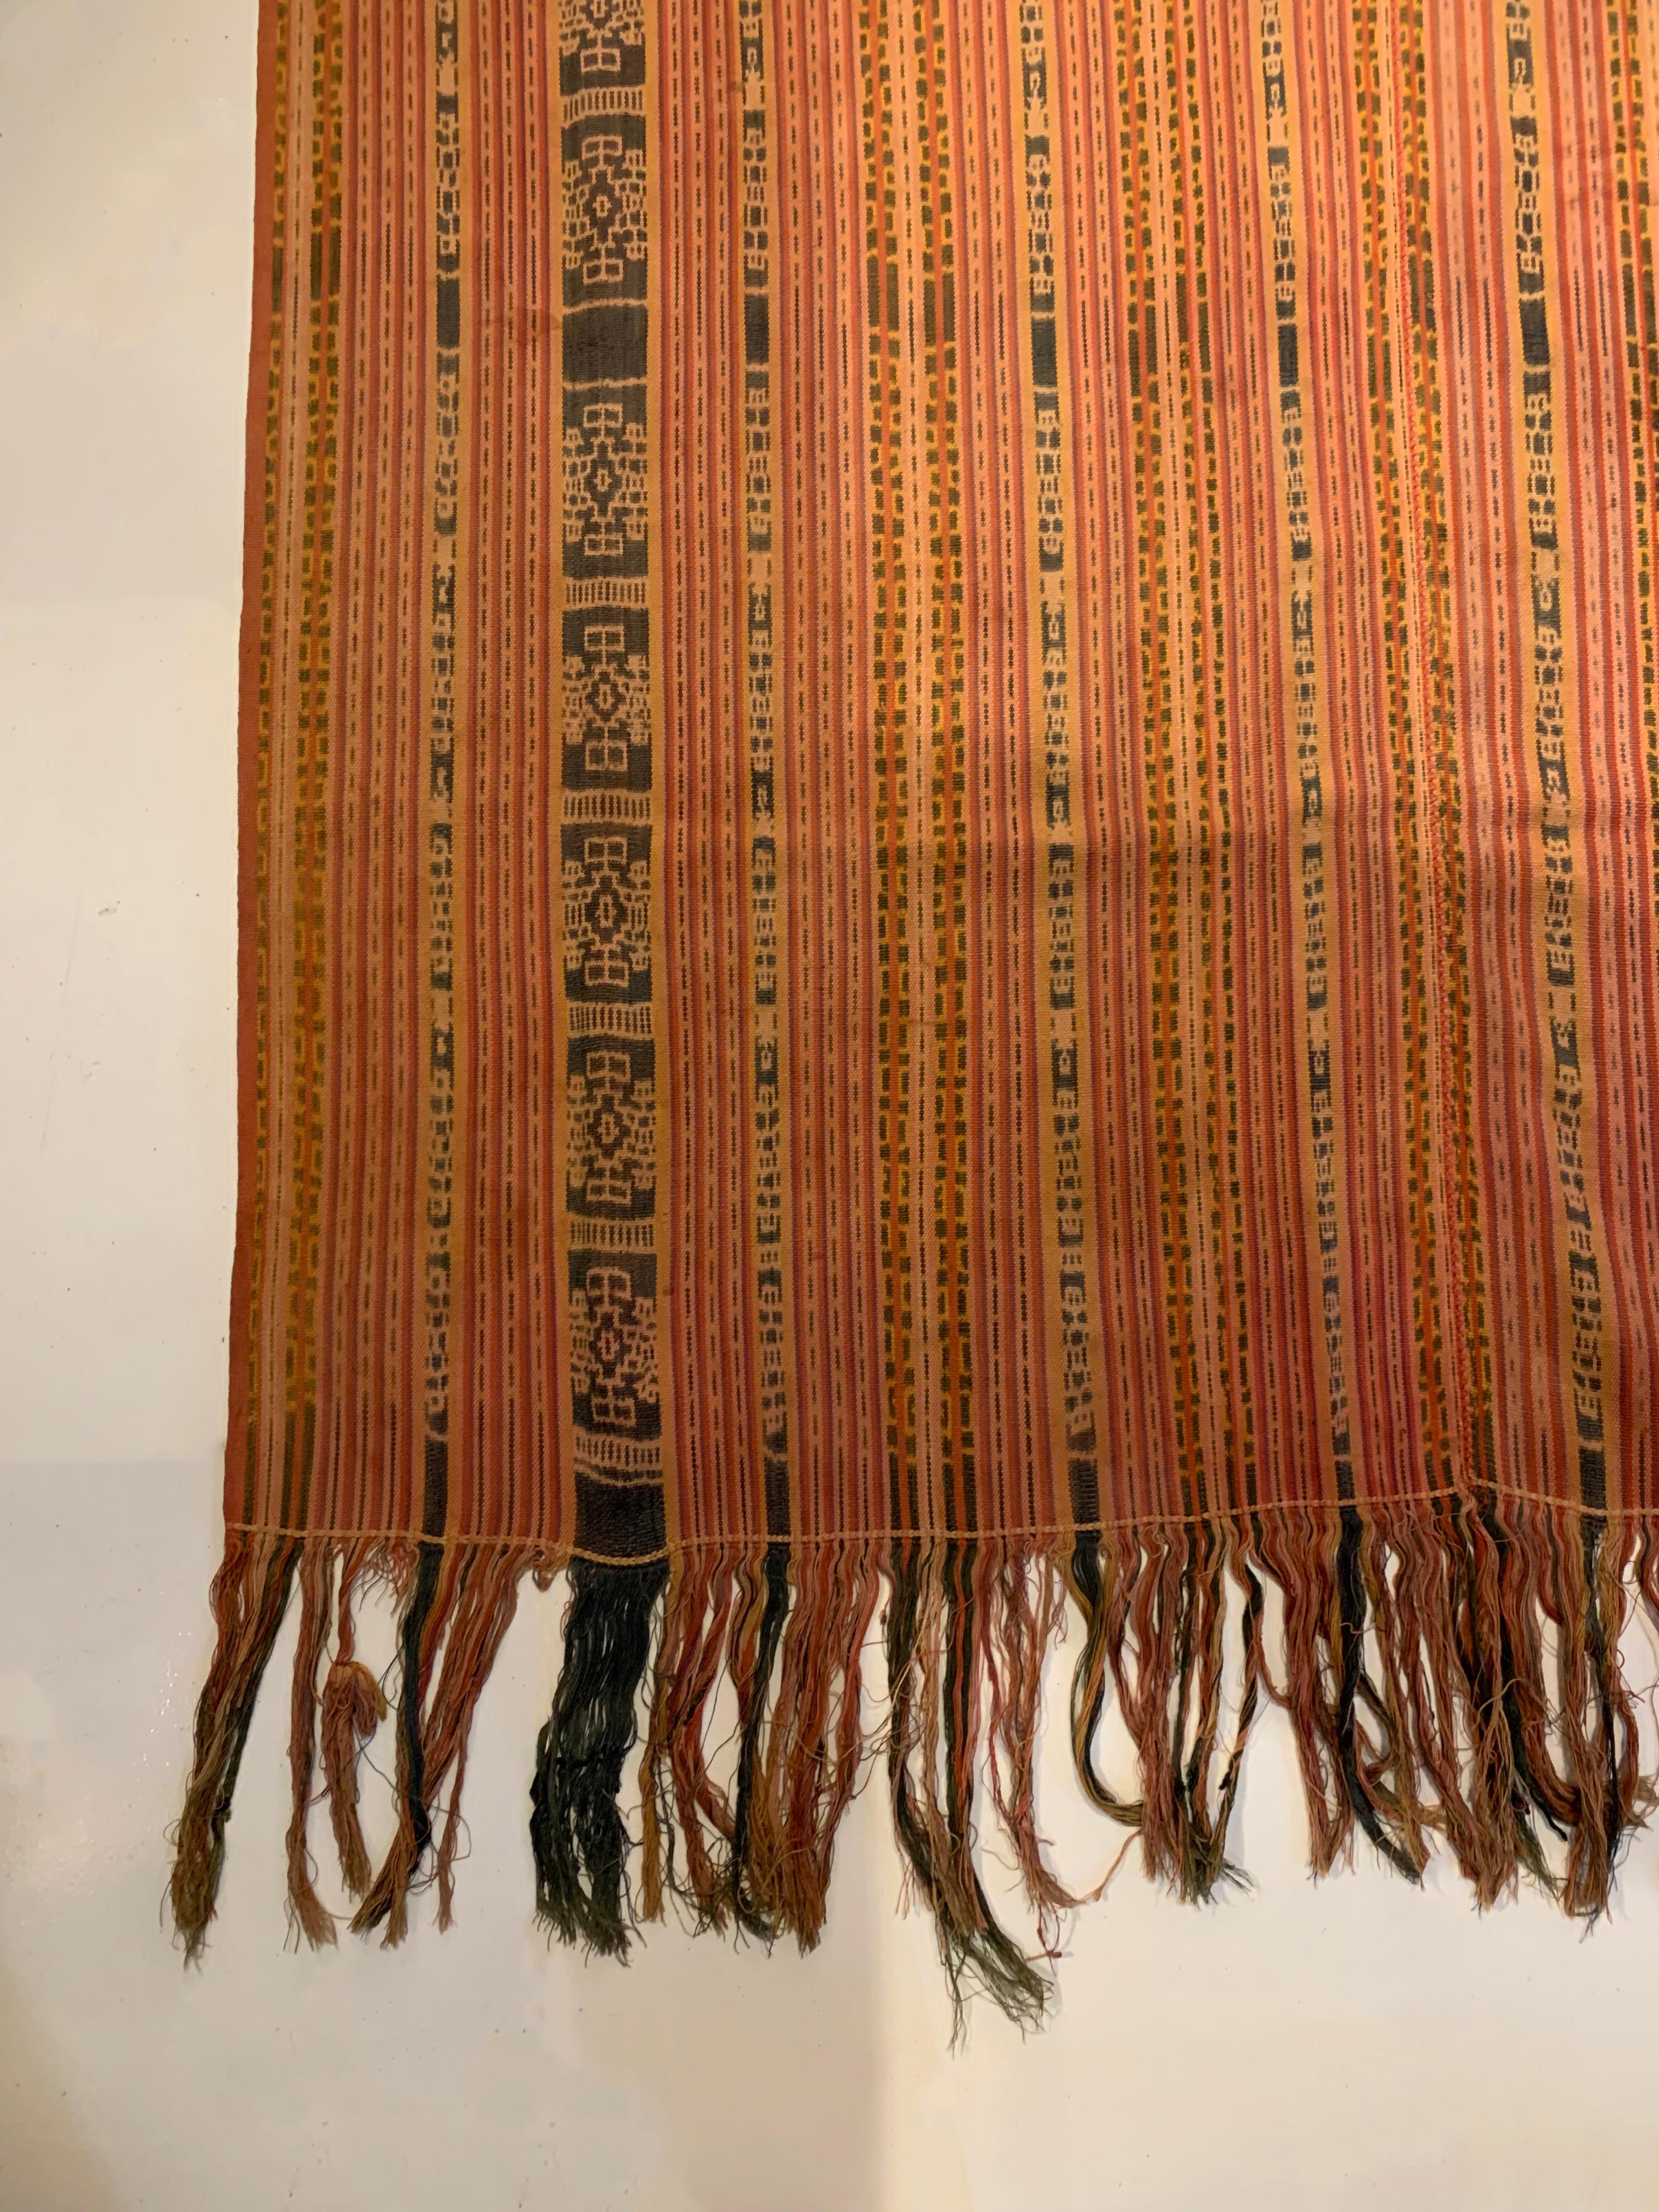 Other Rare Ikat Textile from Timor Stunning Tribal Motifs & Colors, Indonesia c. 1900 For Sale